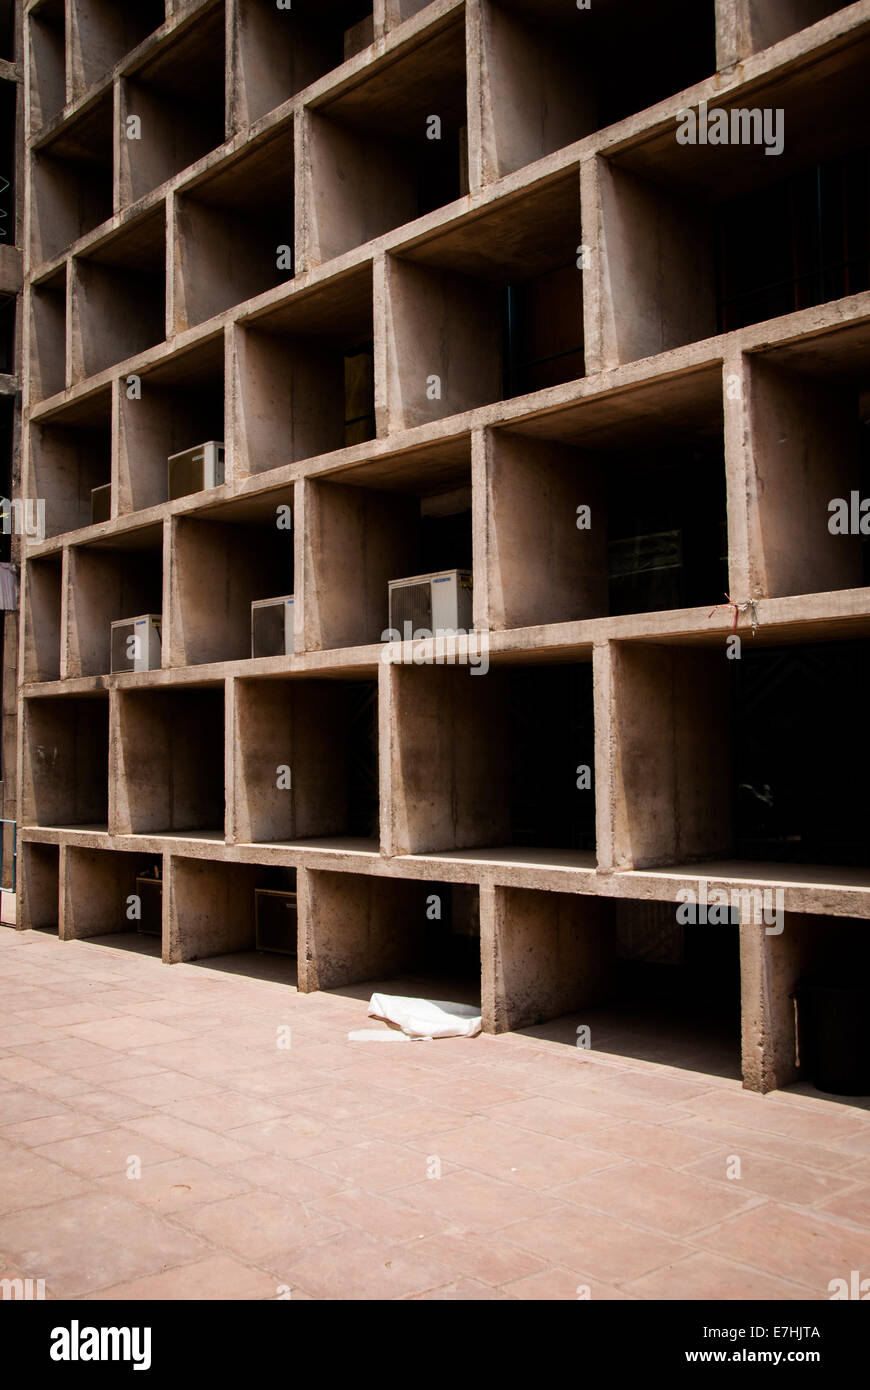 The High Court, designed by Swiss architect Le Corbusier, in Chandigarh, India Stock Photo